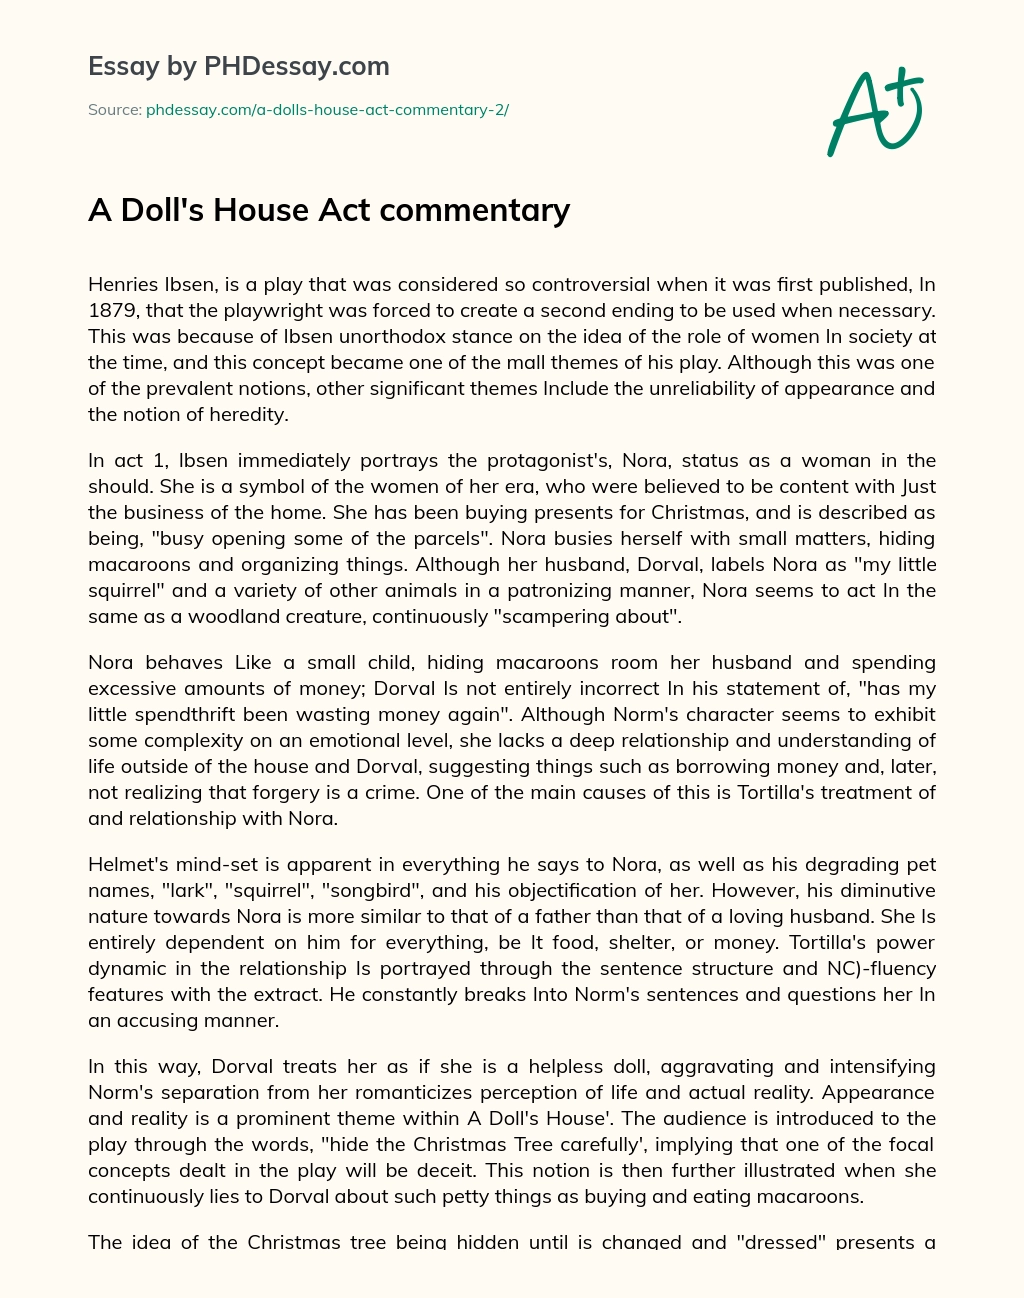 A Doll’s House Act commentary essay